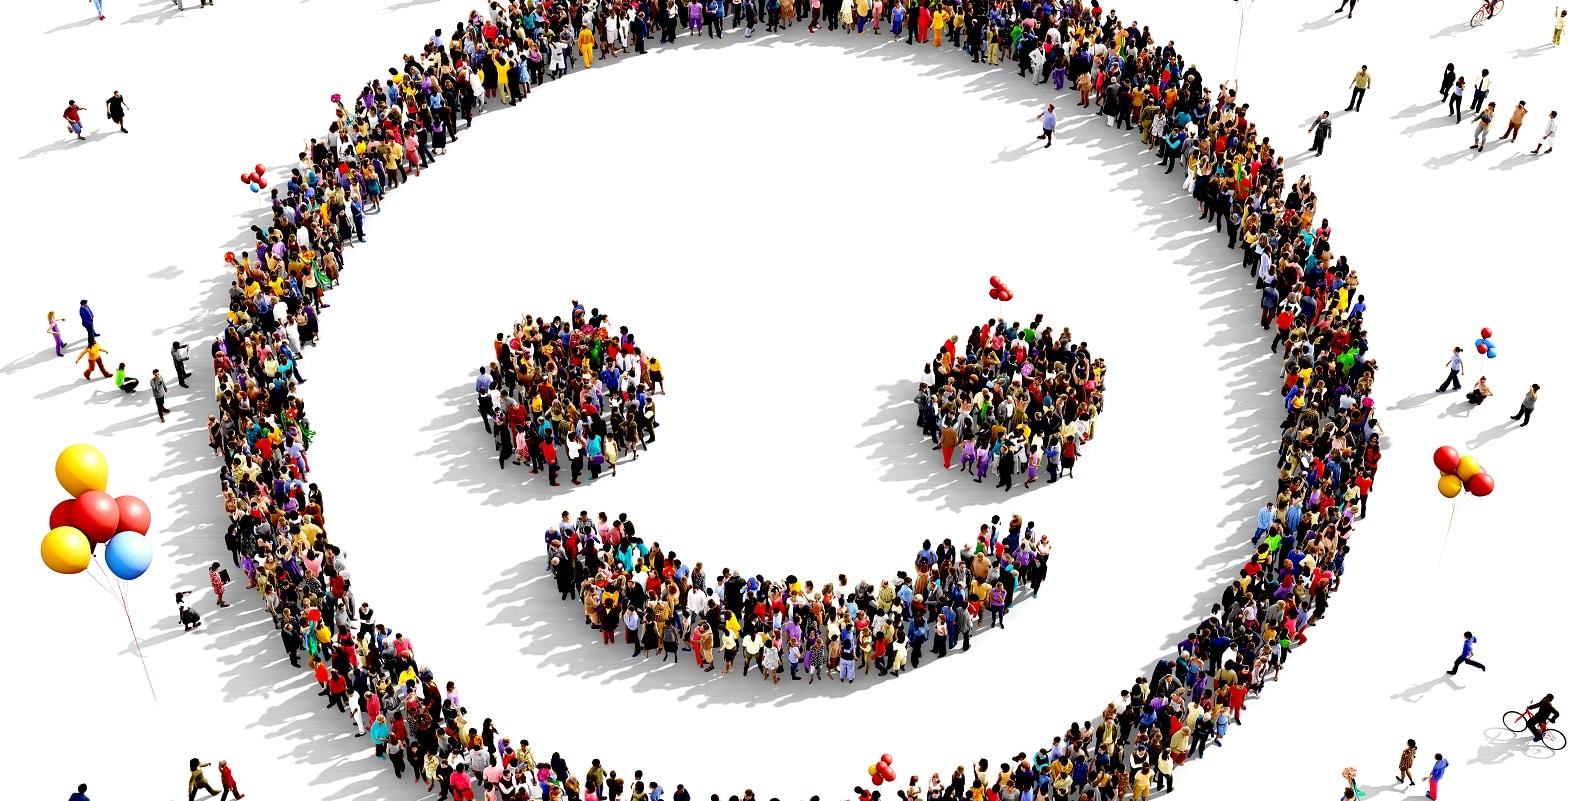 A group of people forming a smiling face on PSA Financial's website